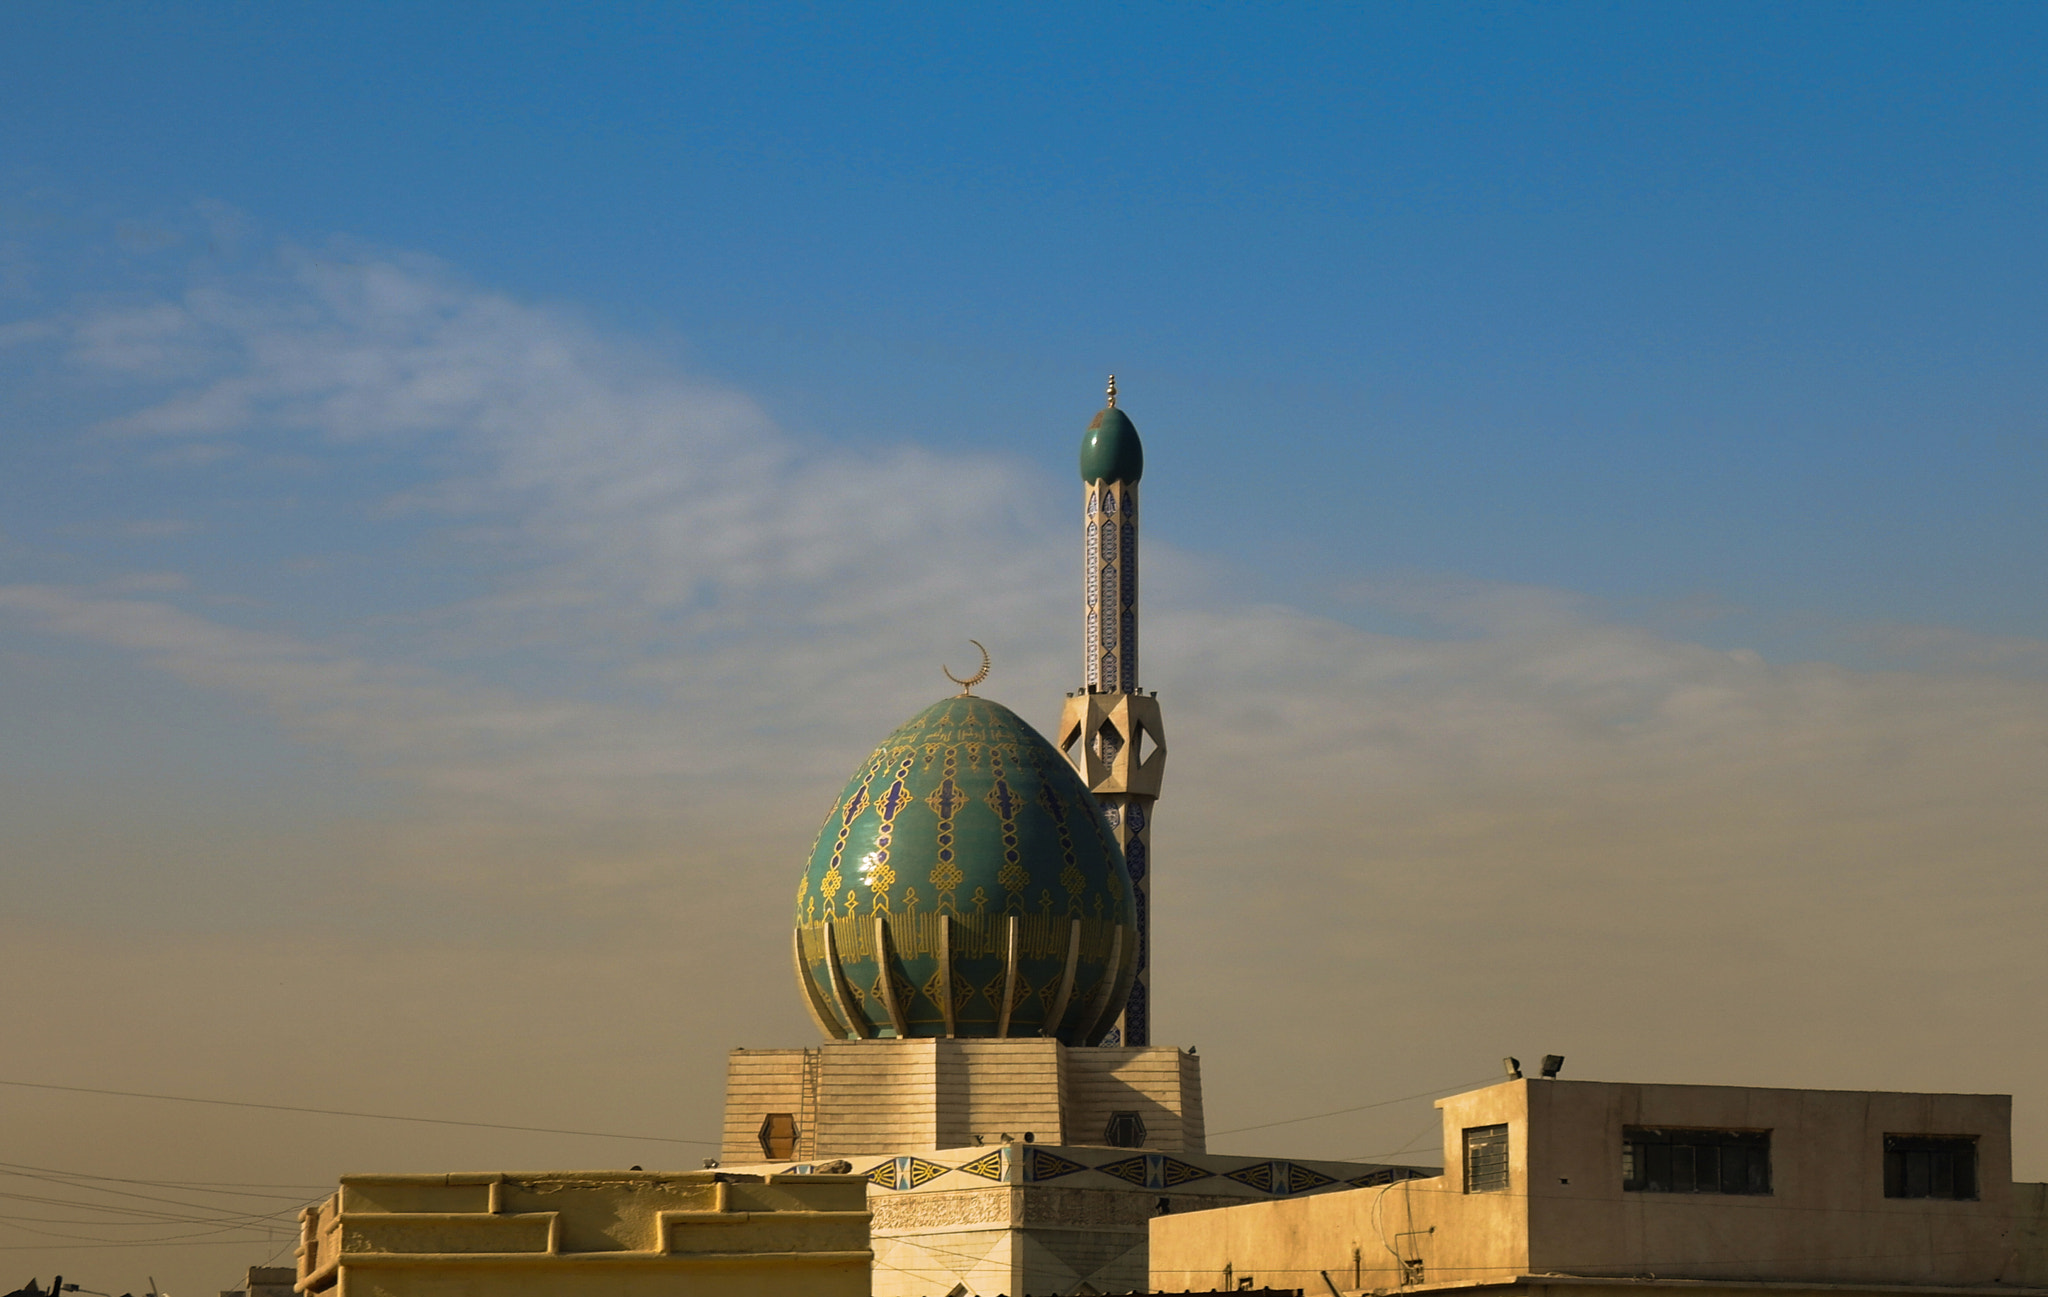 Samsung NX11 sample photo. Exterior view of albunneya mosque, baghdad iraq photography